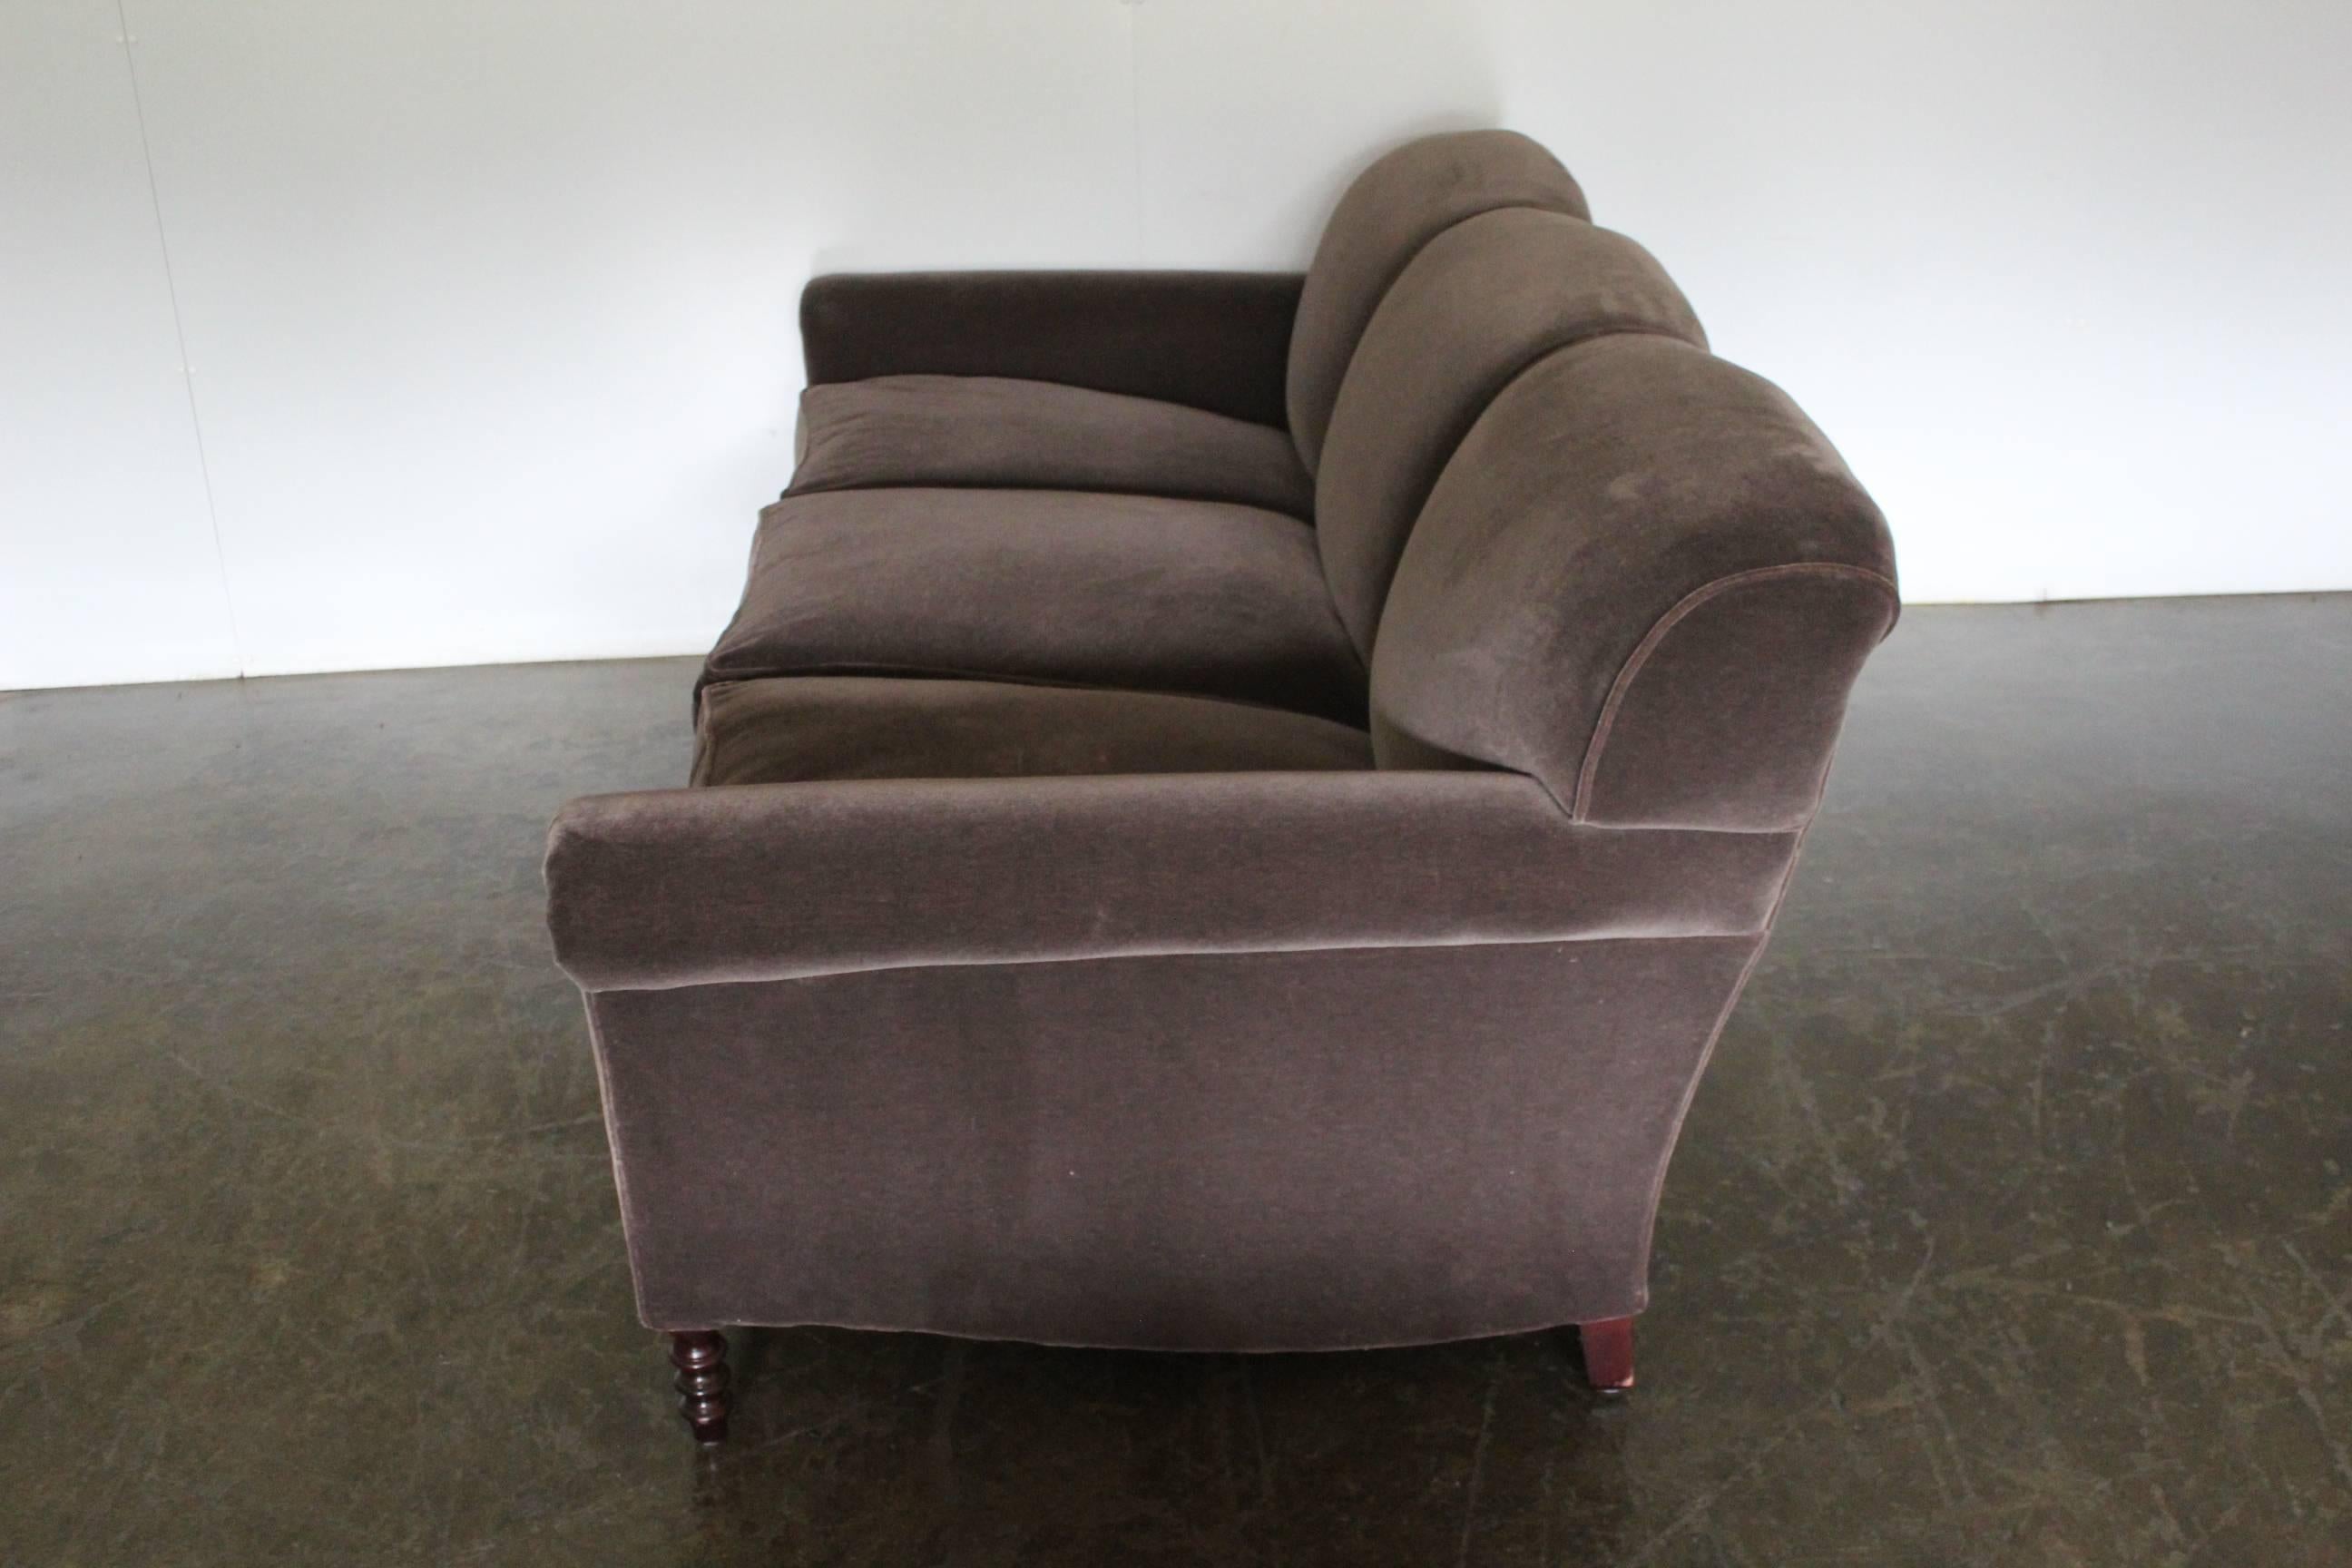 Contemporary Pair of George Smith Signature “Scroll-Arm” Three-Seat Sofas in “Mink” Mohair